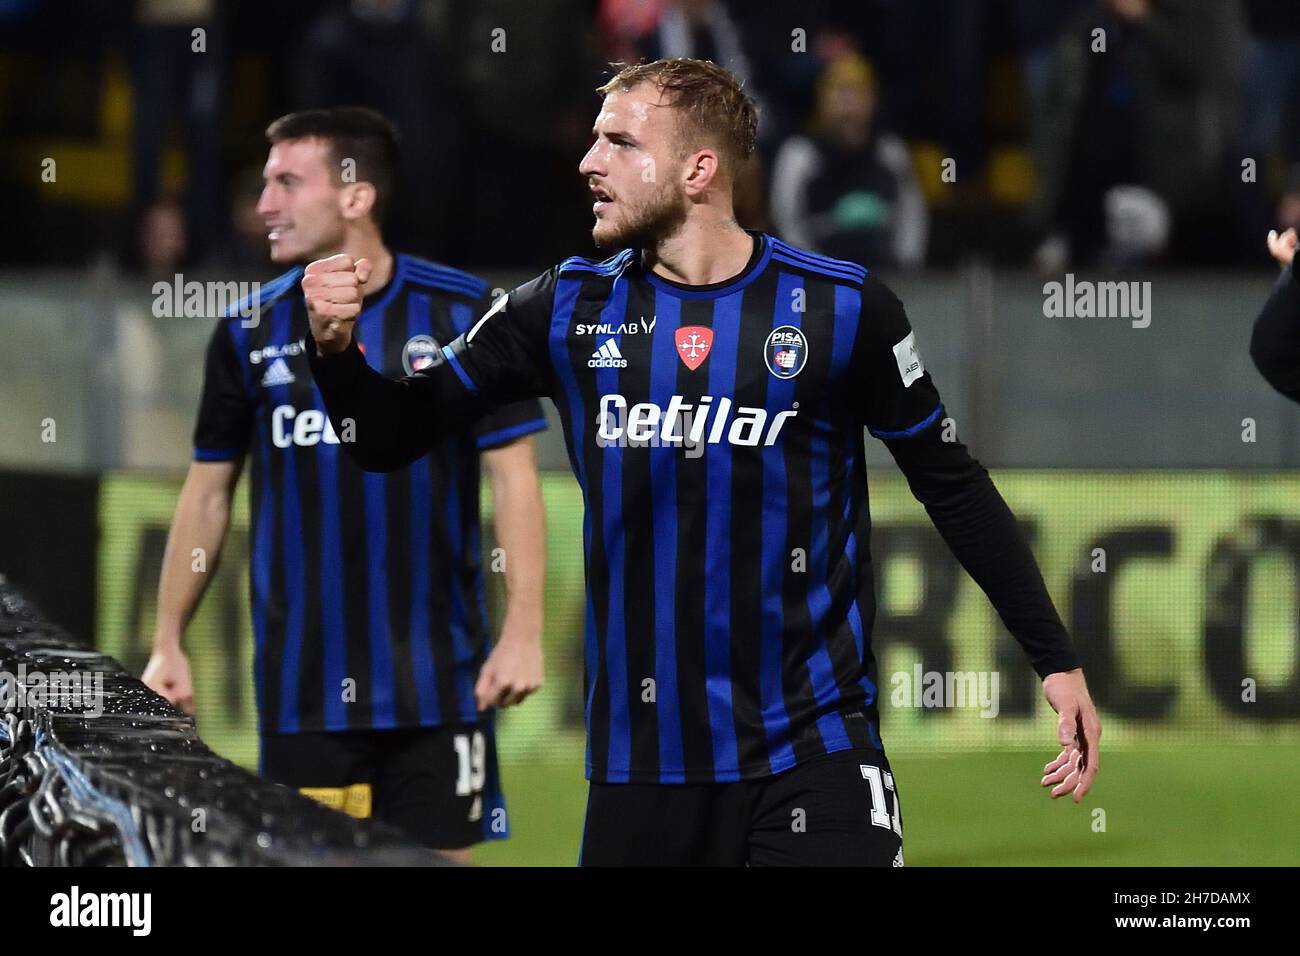 Pisa, Italy. 21st Nov, 2021. Giuseppe Sibilli (Pisa) greets the fans at the  end of the match during AC Pisa vs Benevento Calcio, Italian Football  Championship League BKT in Pisa, Italy, November